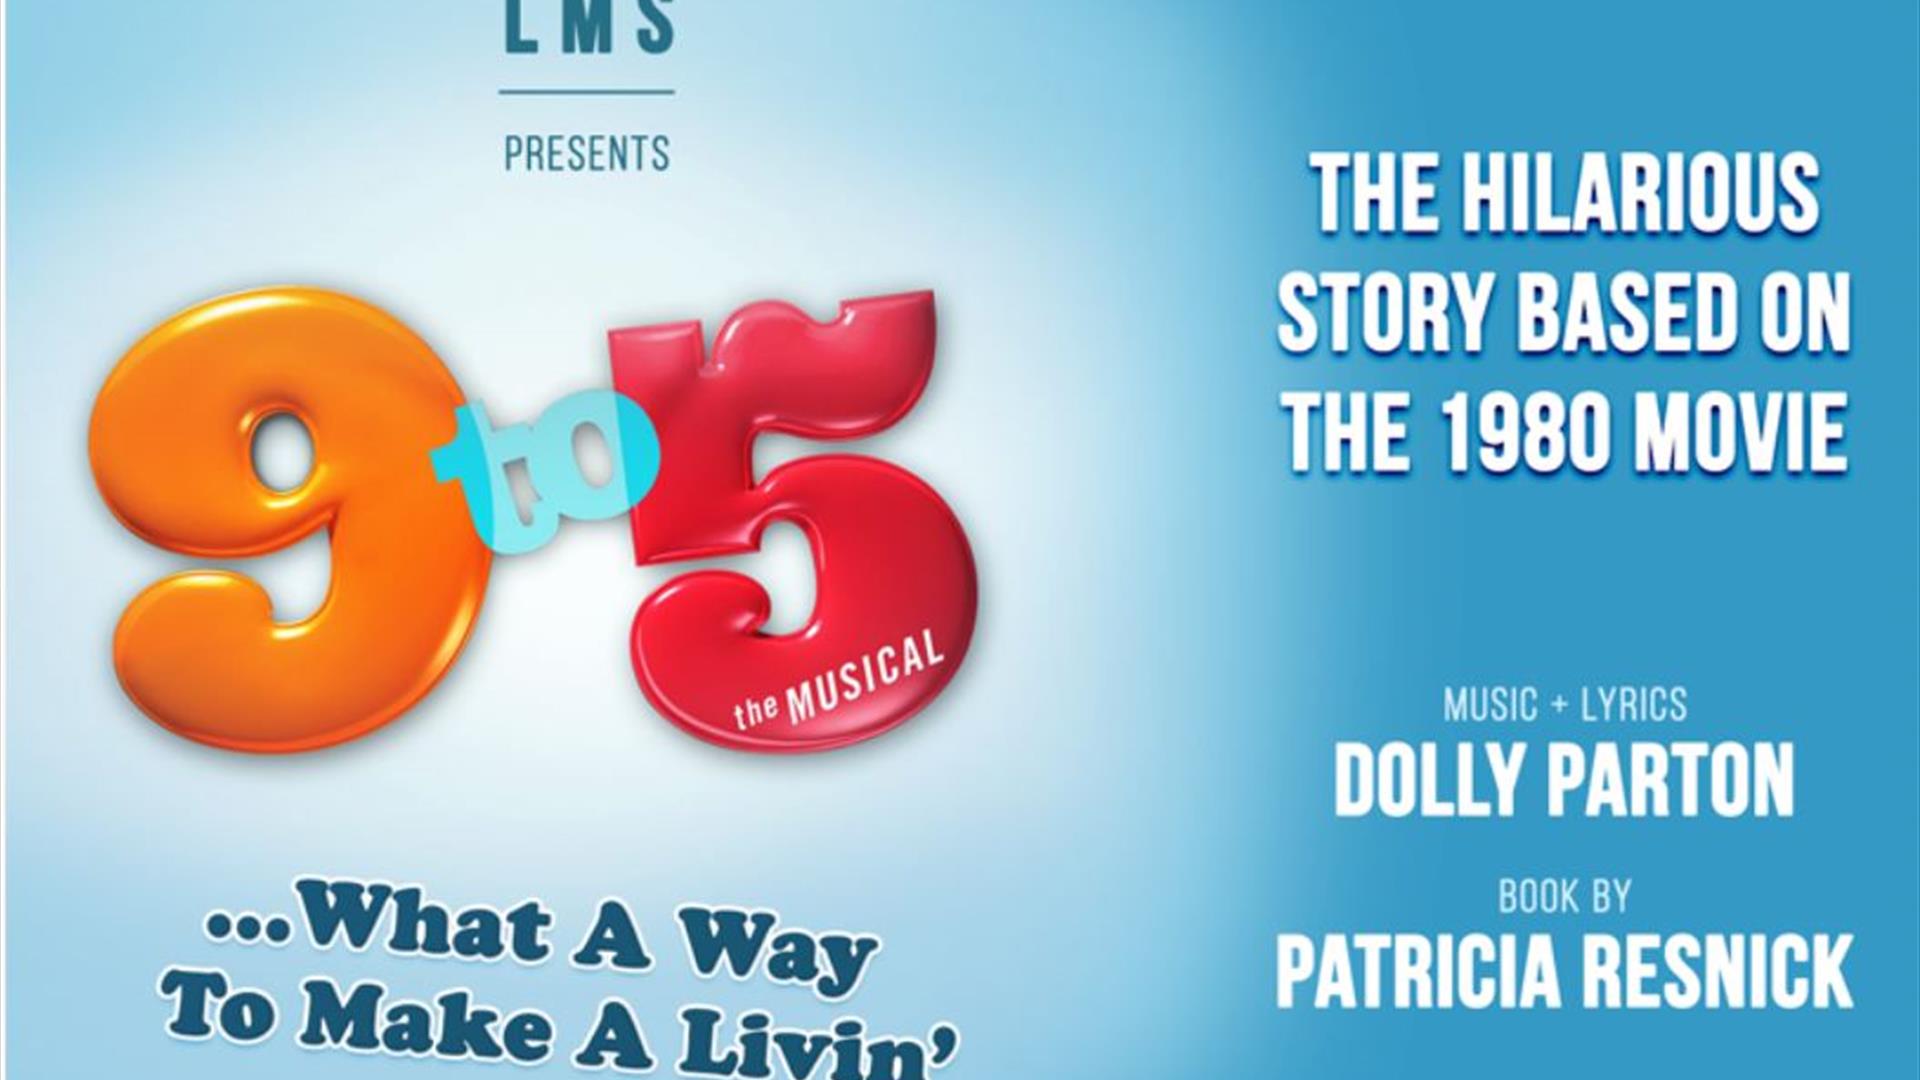 LMS presents 9-5 The Musical